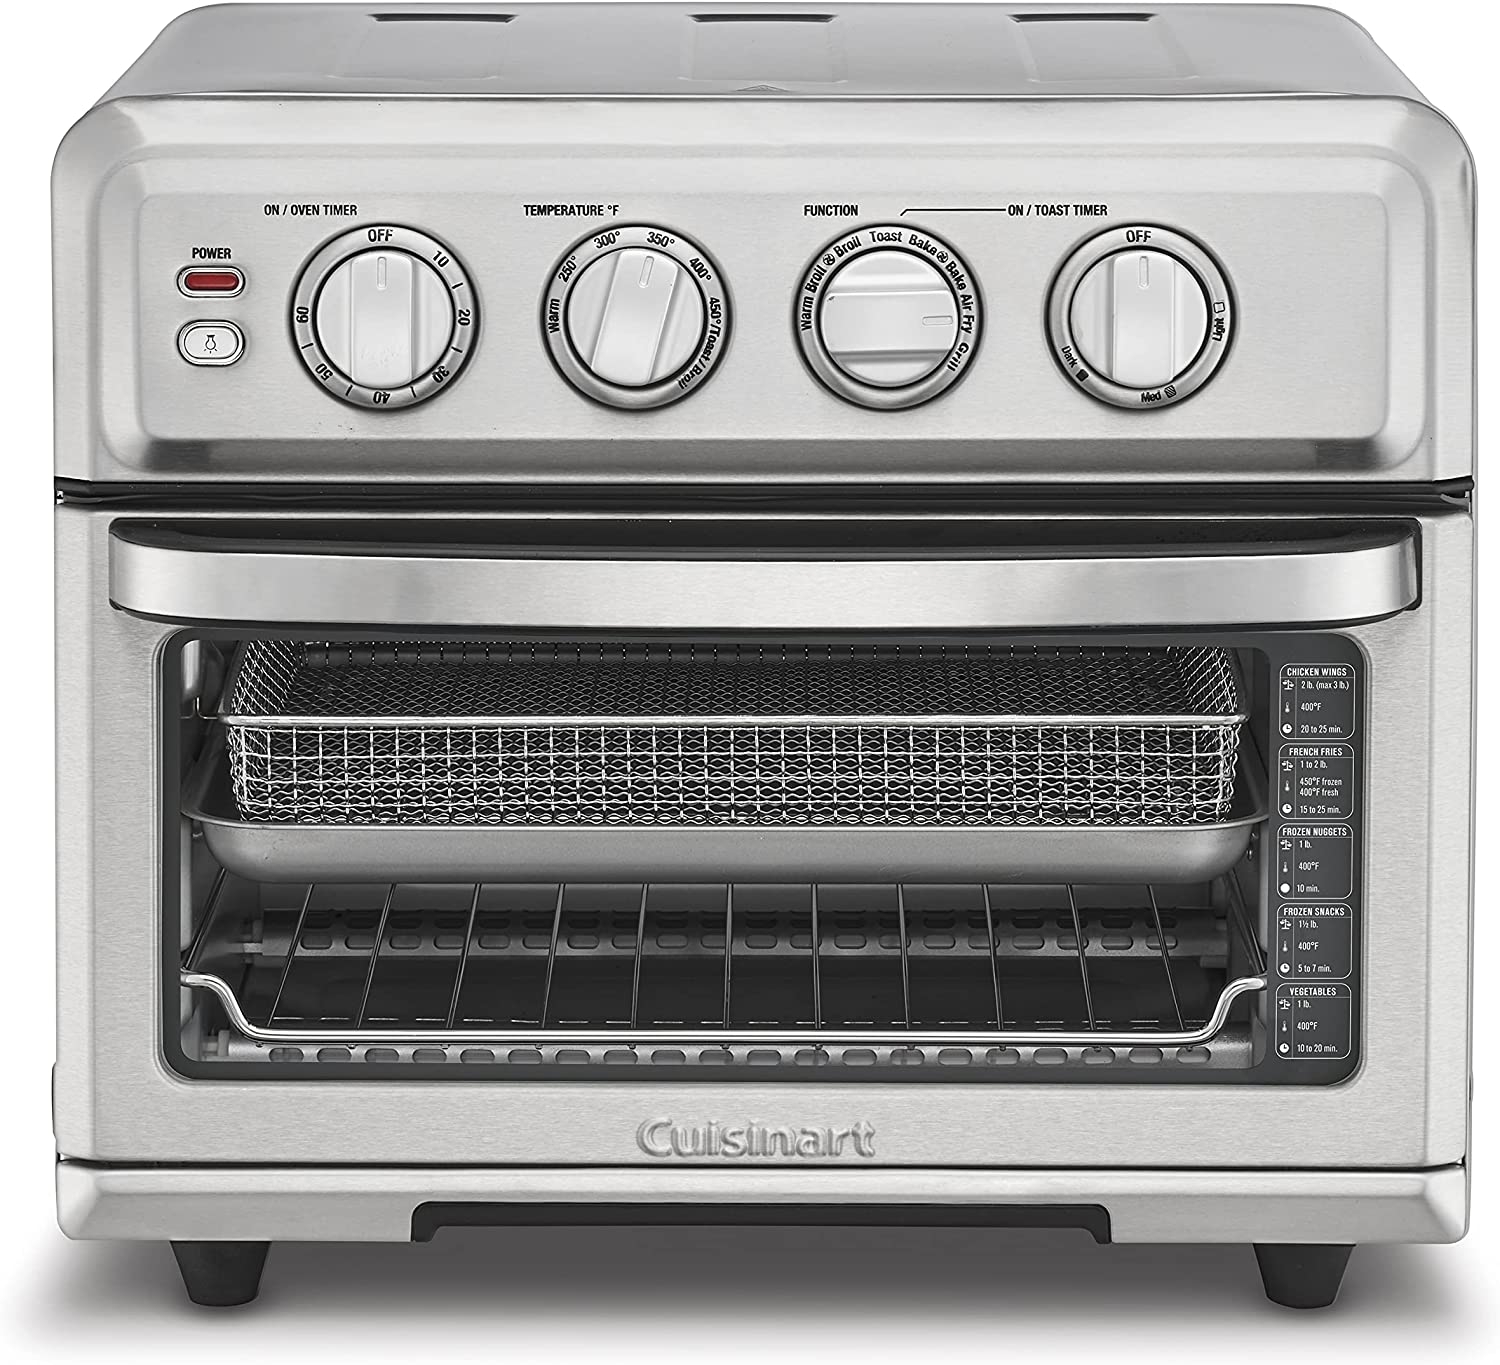 Cuisinart Air Fryer + Convection Toaster Oven, 8-1 Oven with Bake, Grill, Broil & Warm Options, Stainless Steel, TOA-70 Import